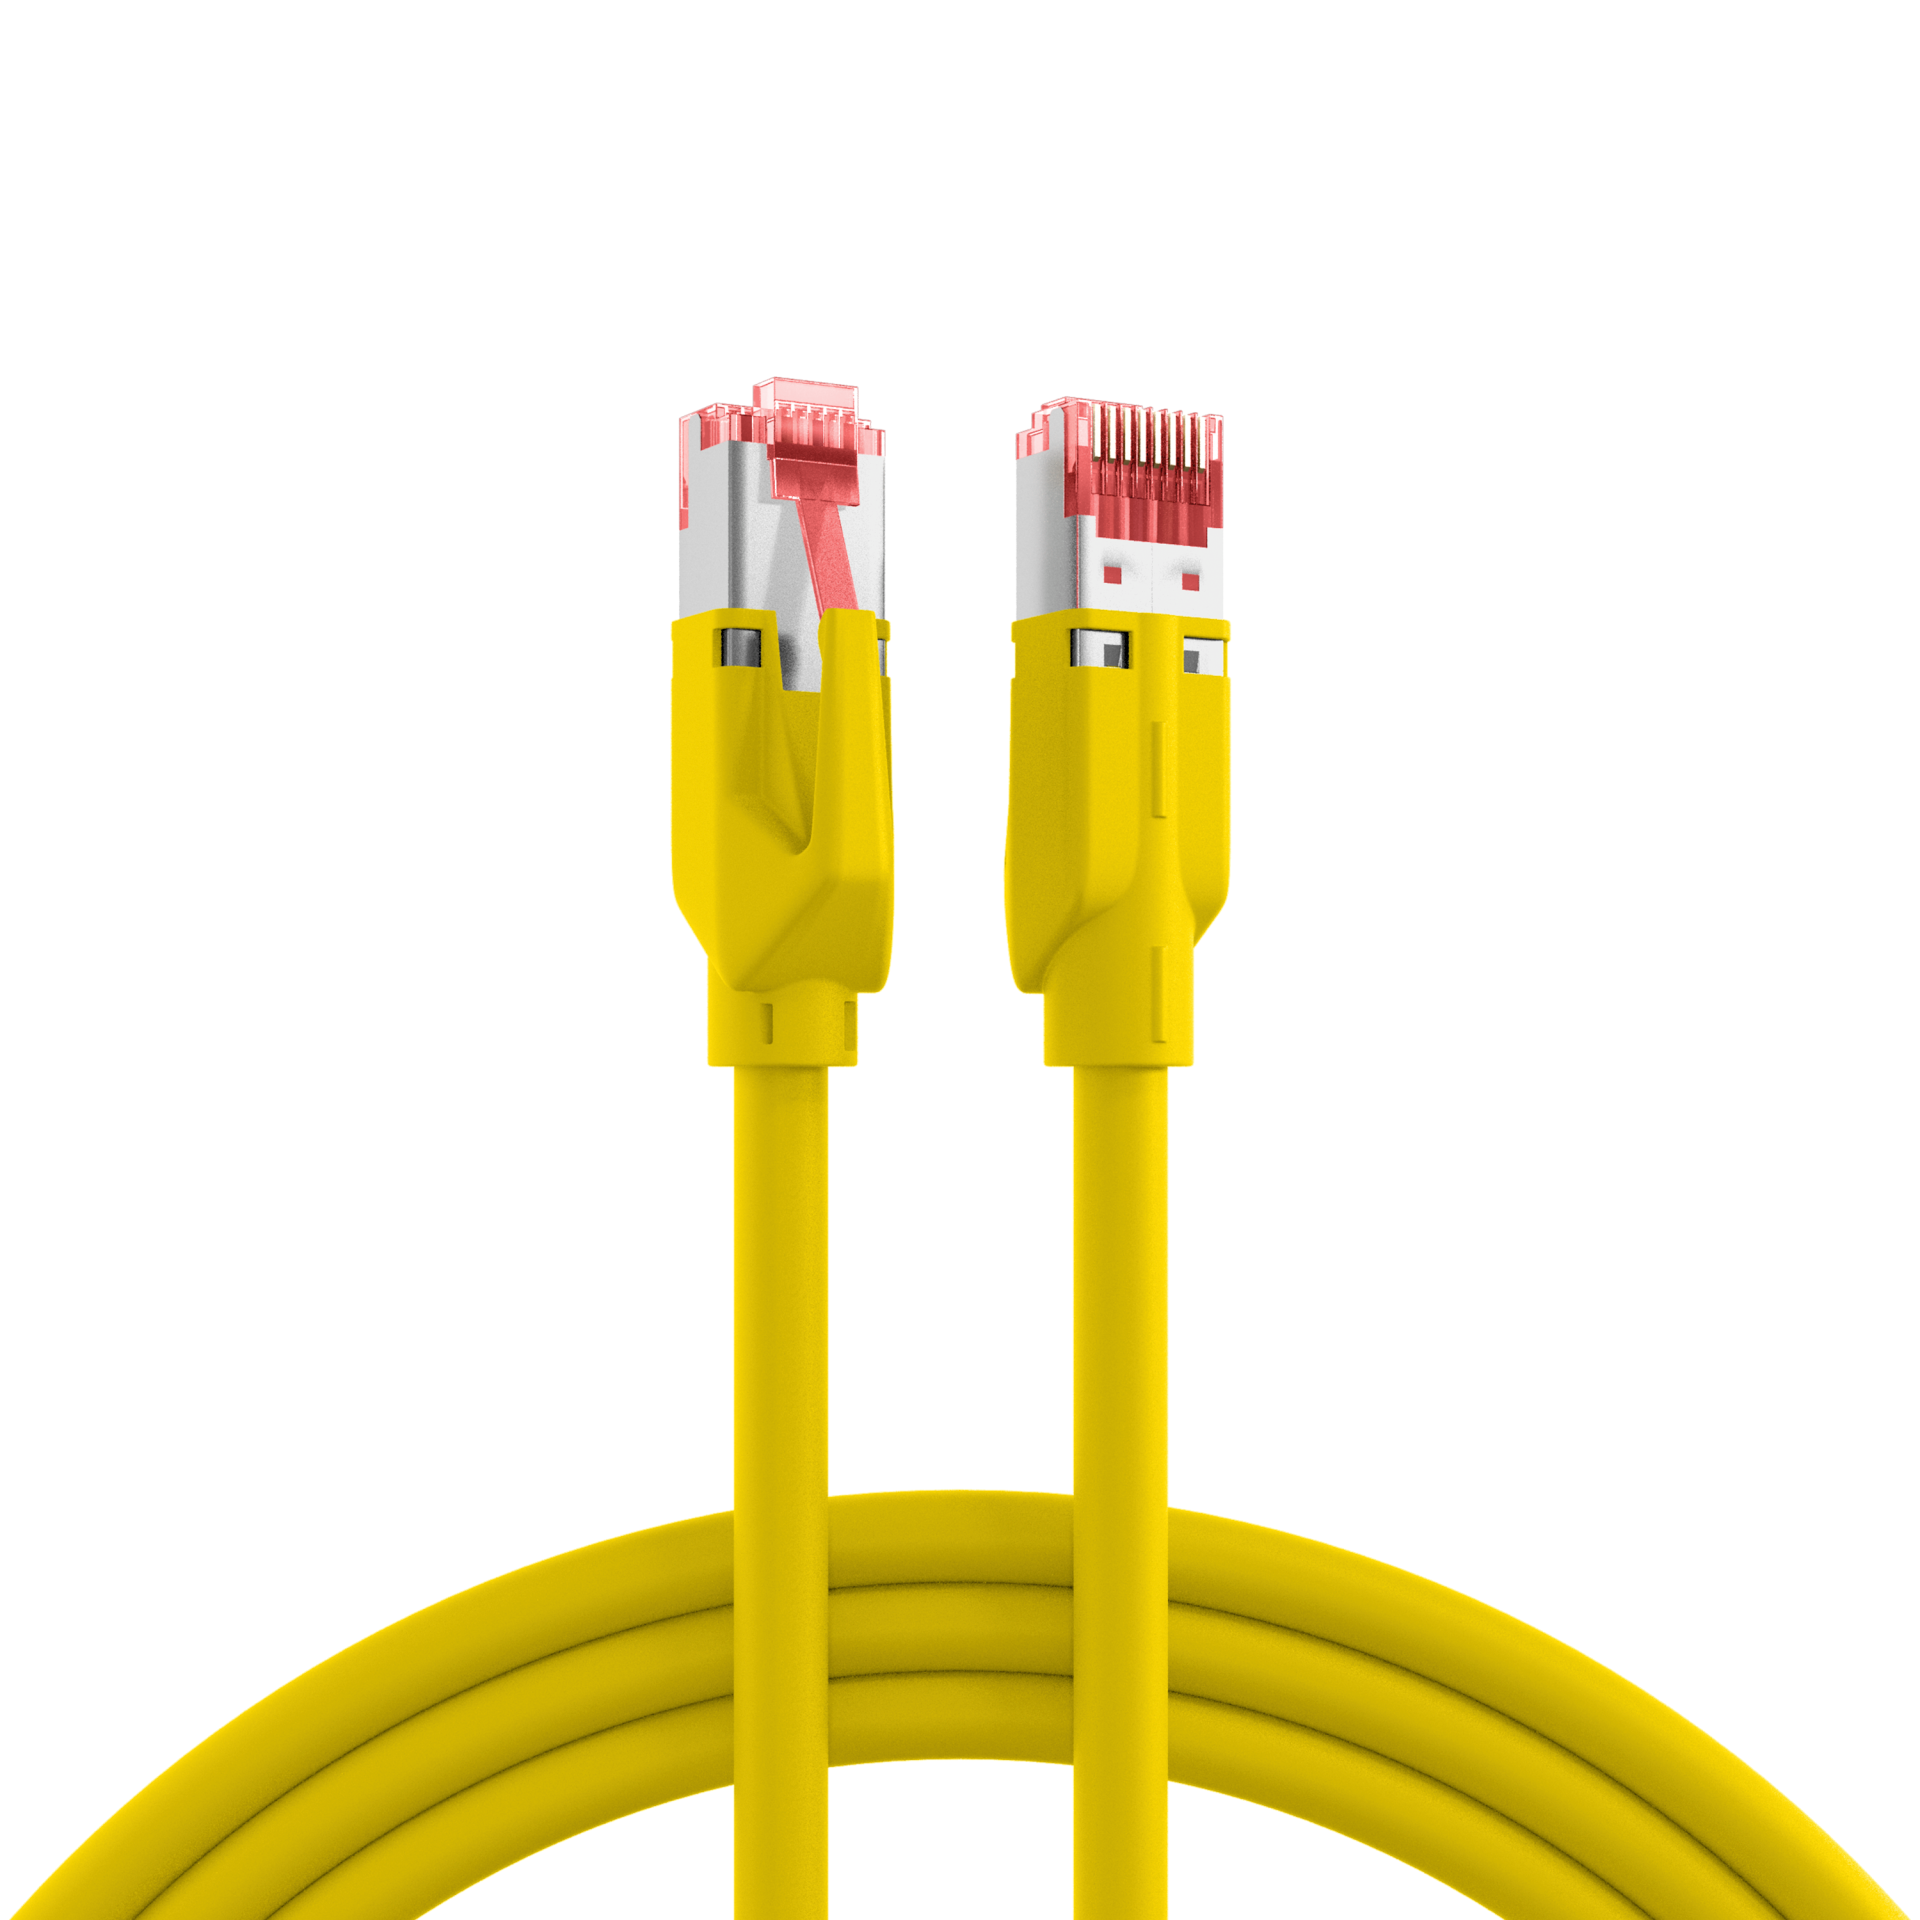 RJ45 Patch Cord Cat.5e SF/UTP PURTM21 for drag chains yellow 1,5m